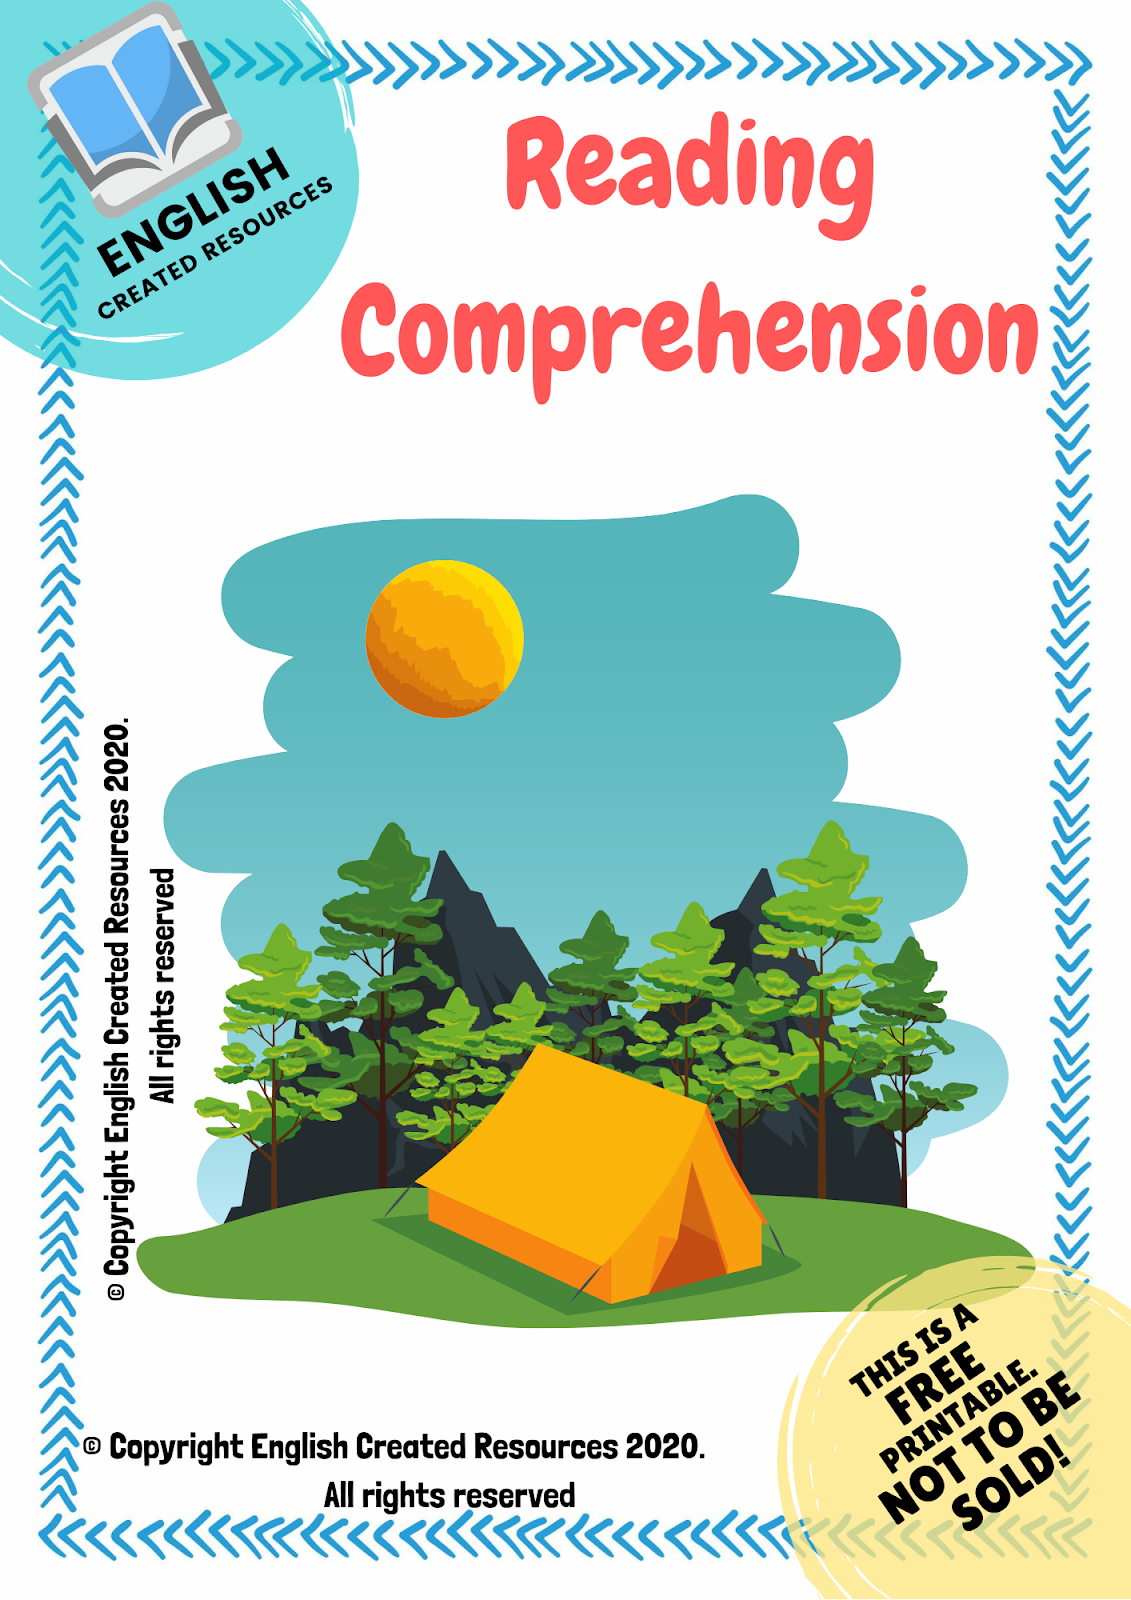 free-reading-comprehension-passages-is-suitable-for-kindergarten-students-or-beginning-readers